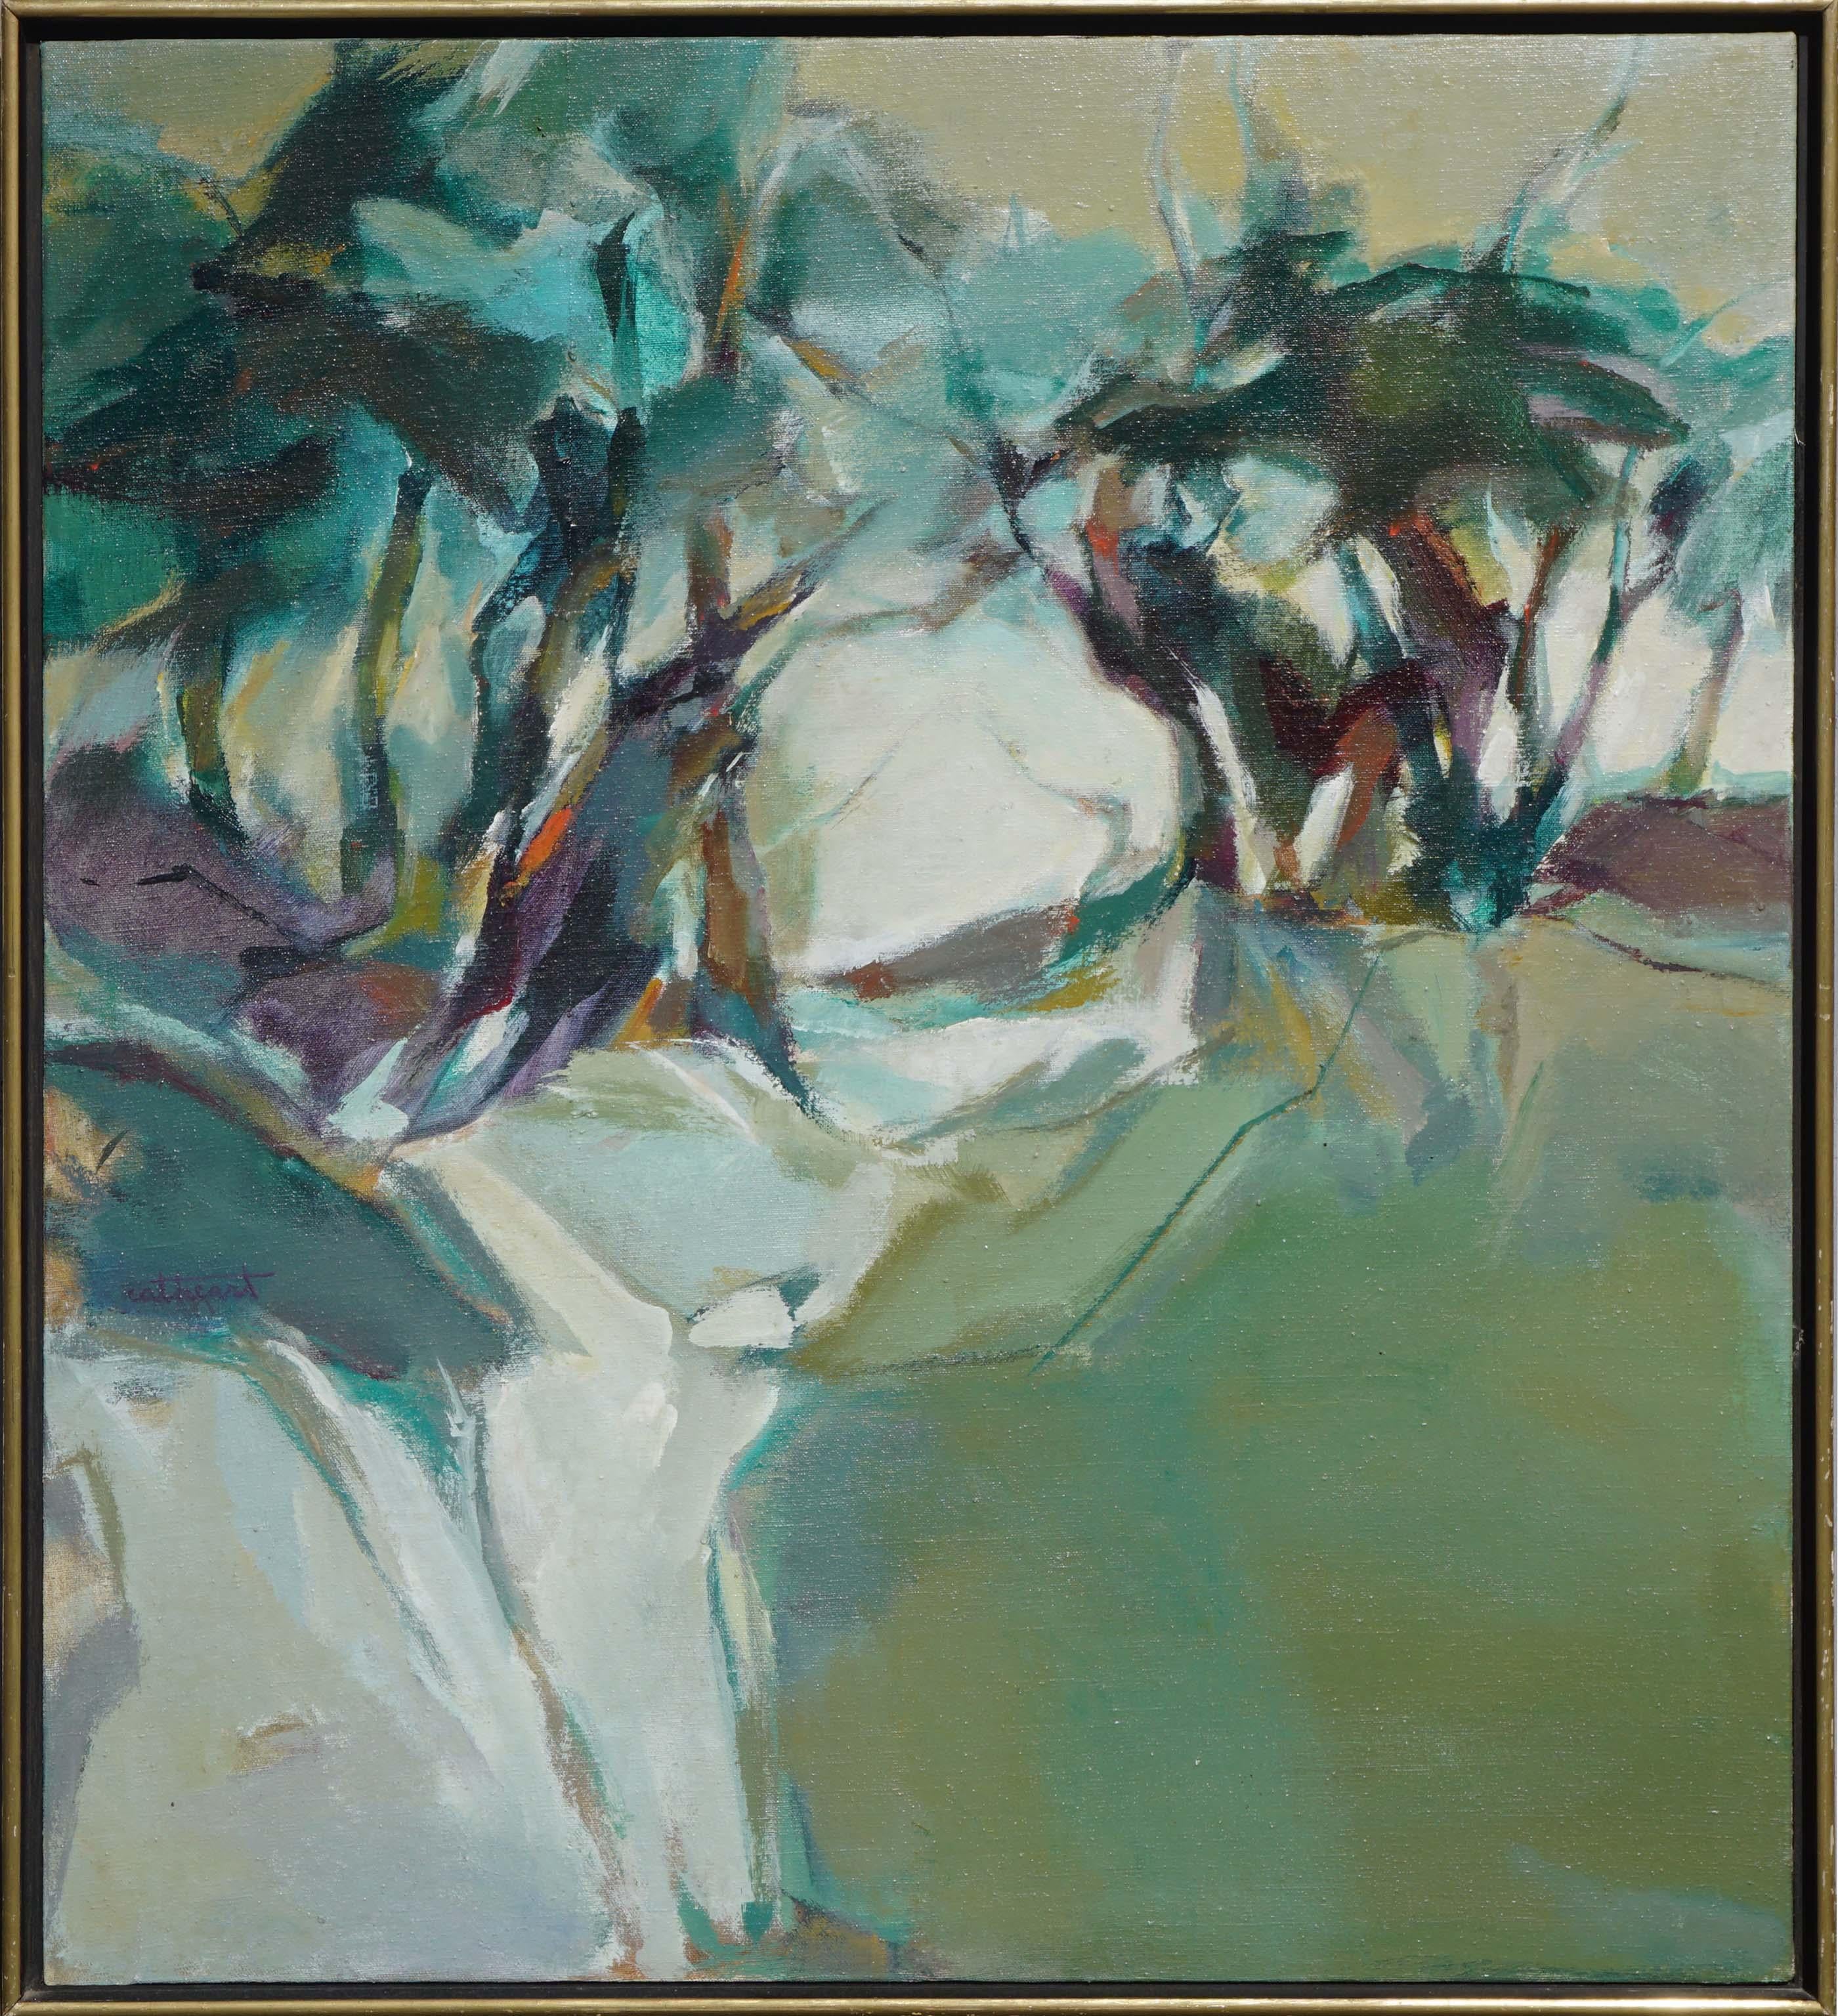 Marjorie Cathcart Landscape Painting - Abstract Treescape Landscape Berkeley School Abstract Expressionist 